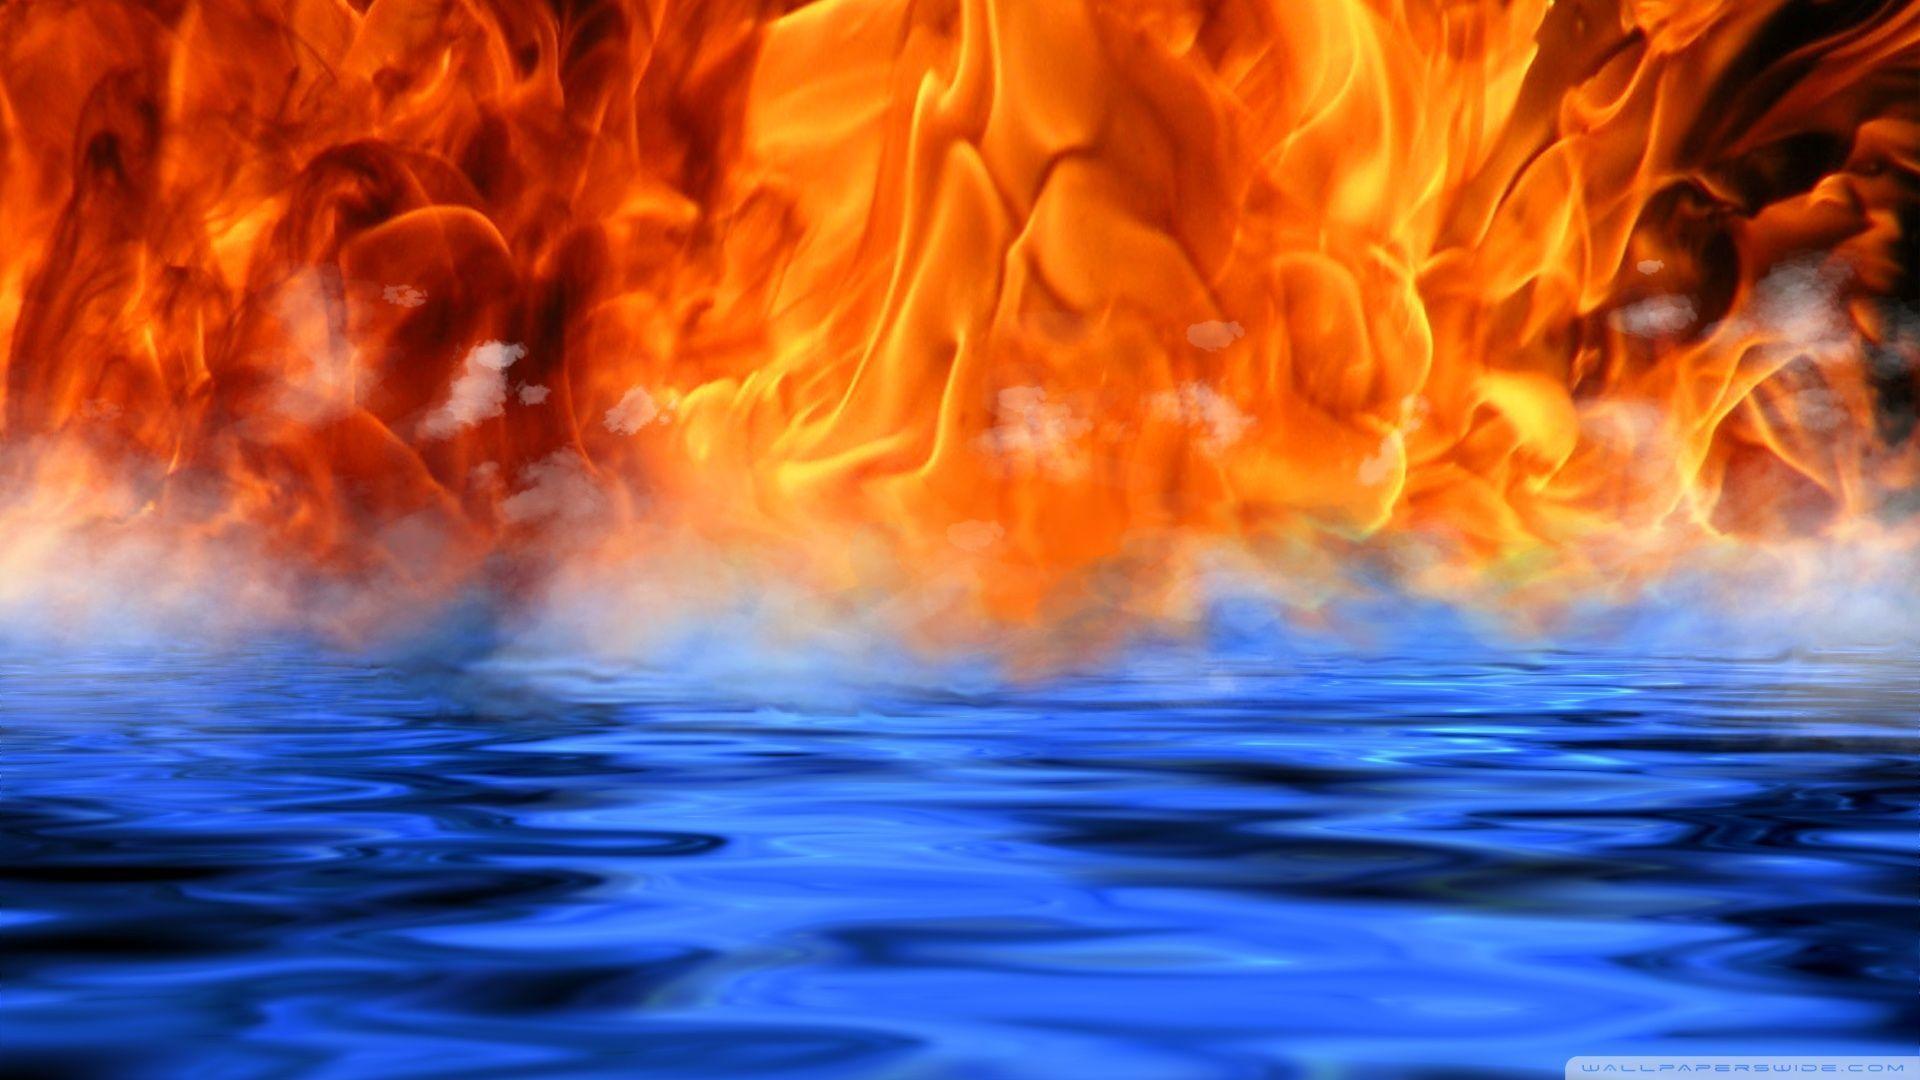 Fire And Water Wallpaper Background